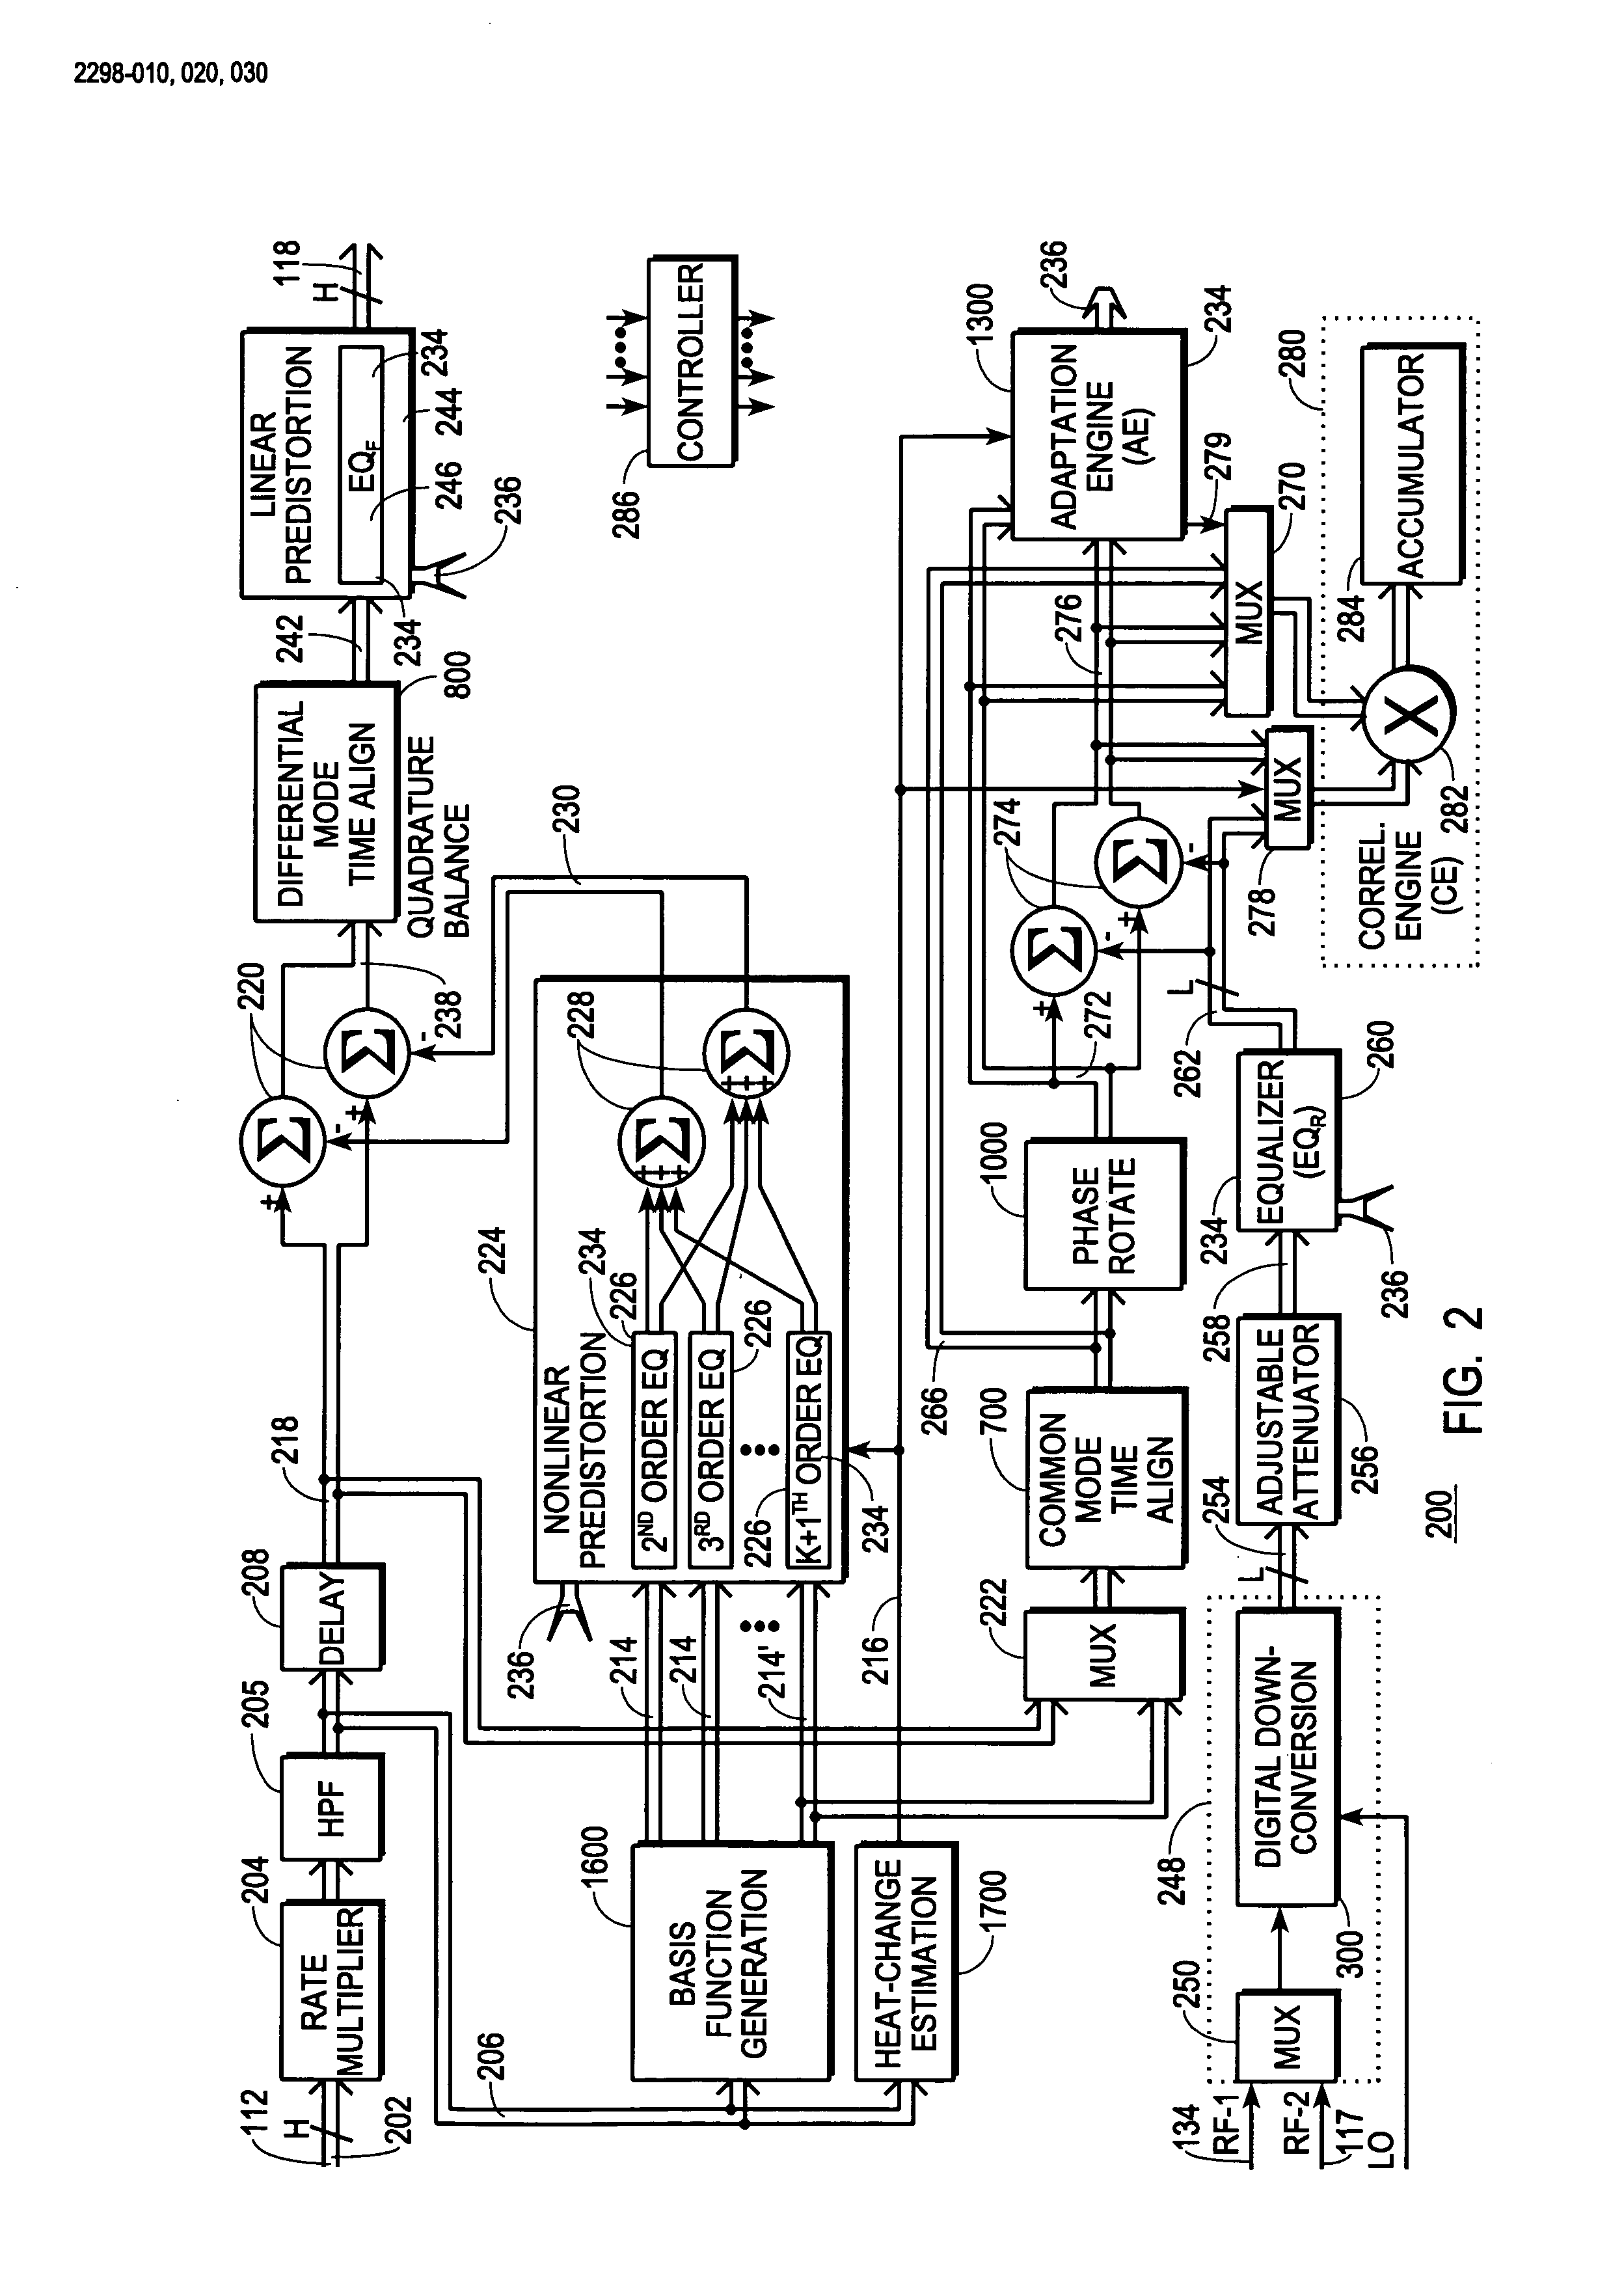 Predistortion circuit and method for compensating linear distortion in a digital RF communications transmitter